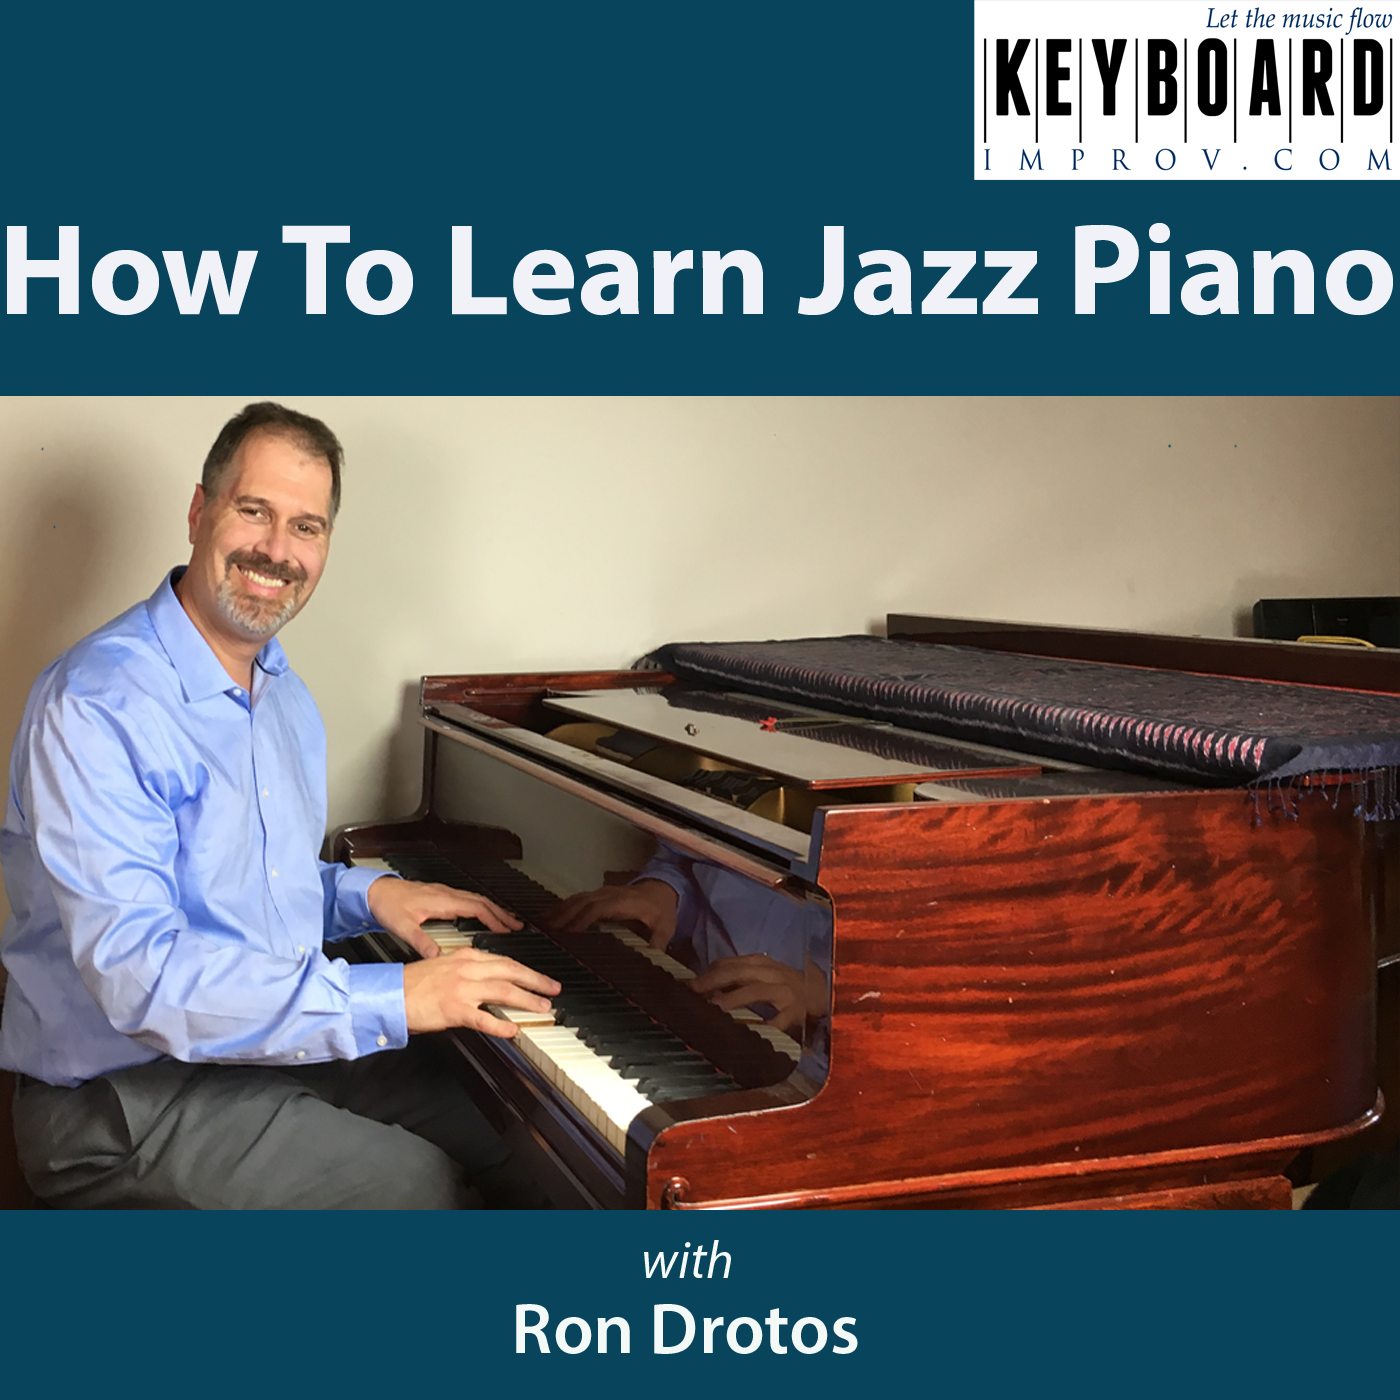 How To Learn Jazz Piano